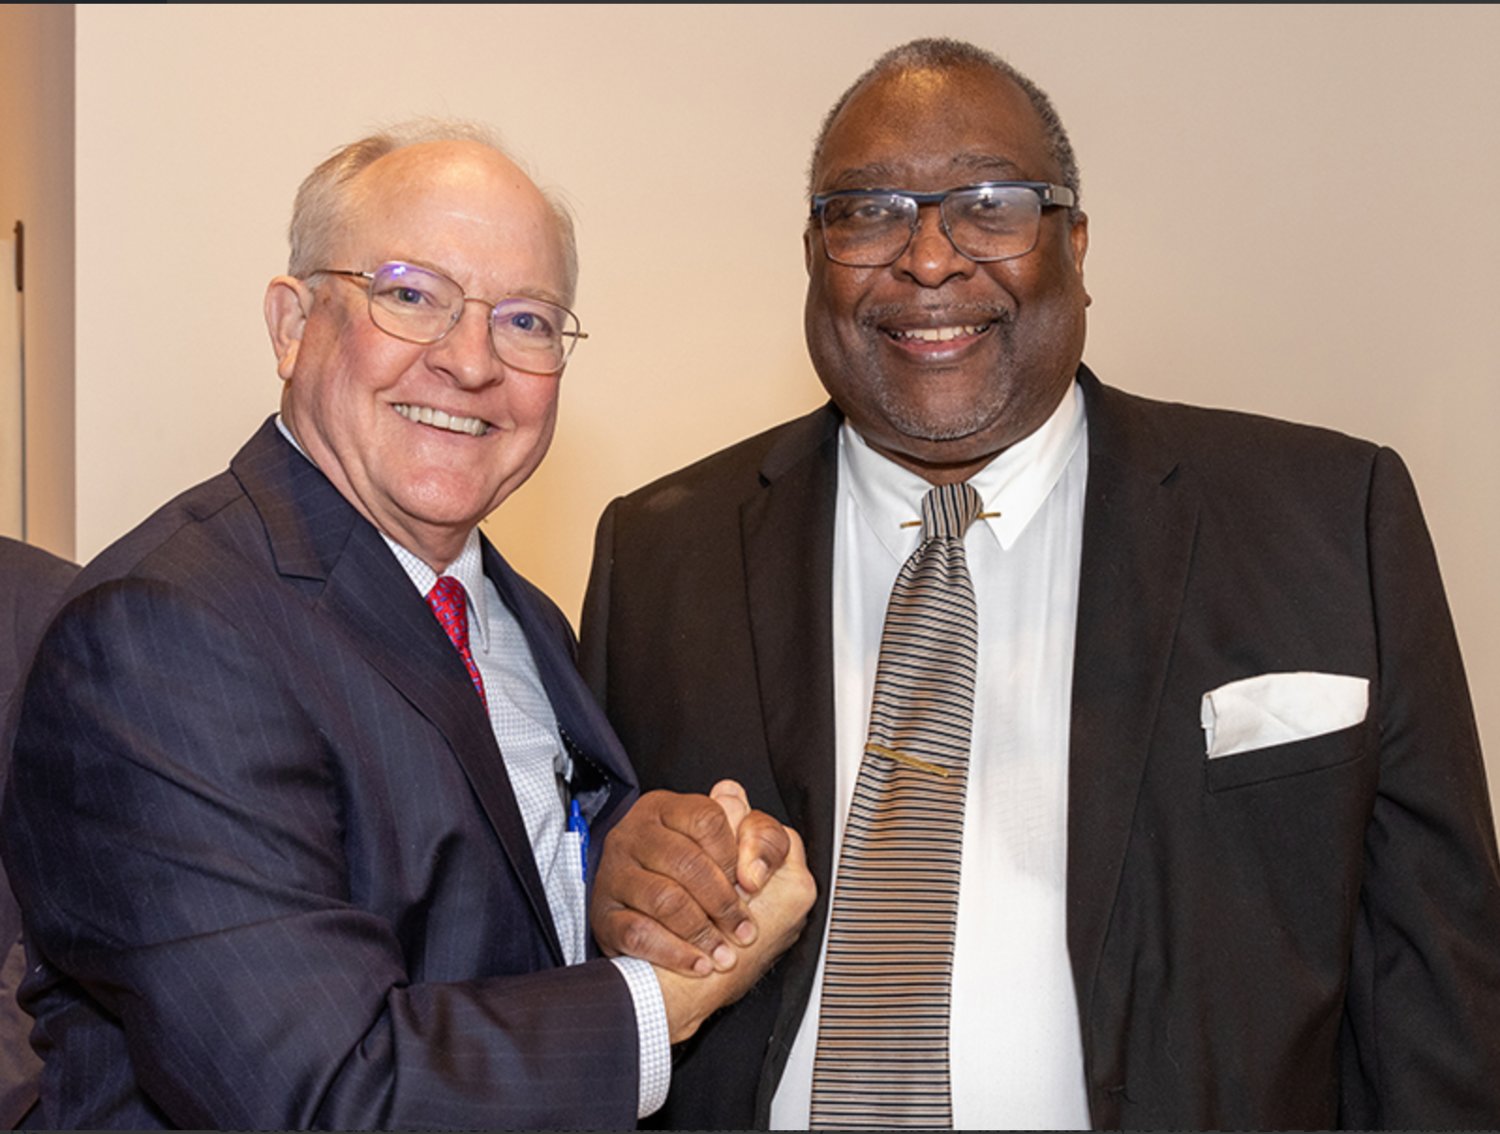 Dr. William Boteler, left, and Dr. Acie Whitlock were honored by the Dental Alumni Board during a Jan 27 celebration. Whitlock is the 2023 Dental Alumnus of the Year, and Boteler is the 2023 Distinguished Friend of the Year.